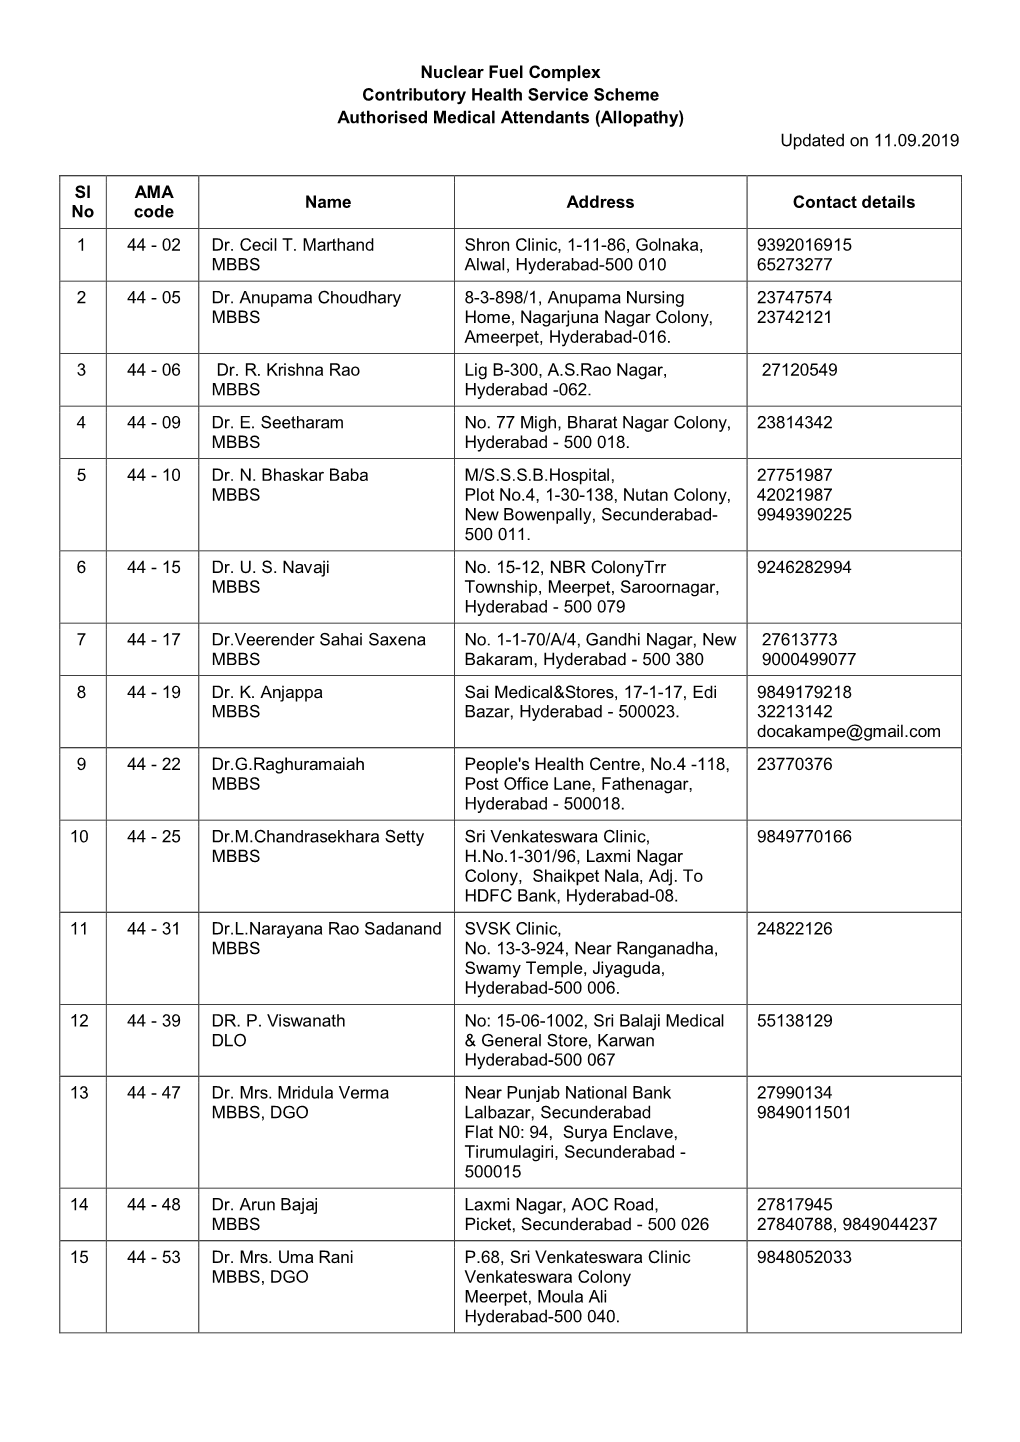 Authorised Medical Attendants (Allopathy) Updated on 11.09.2019